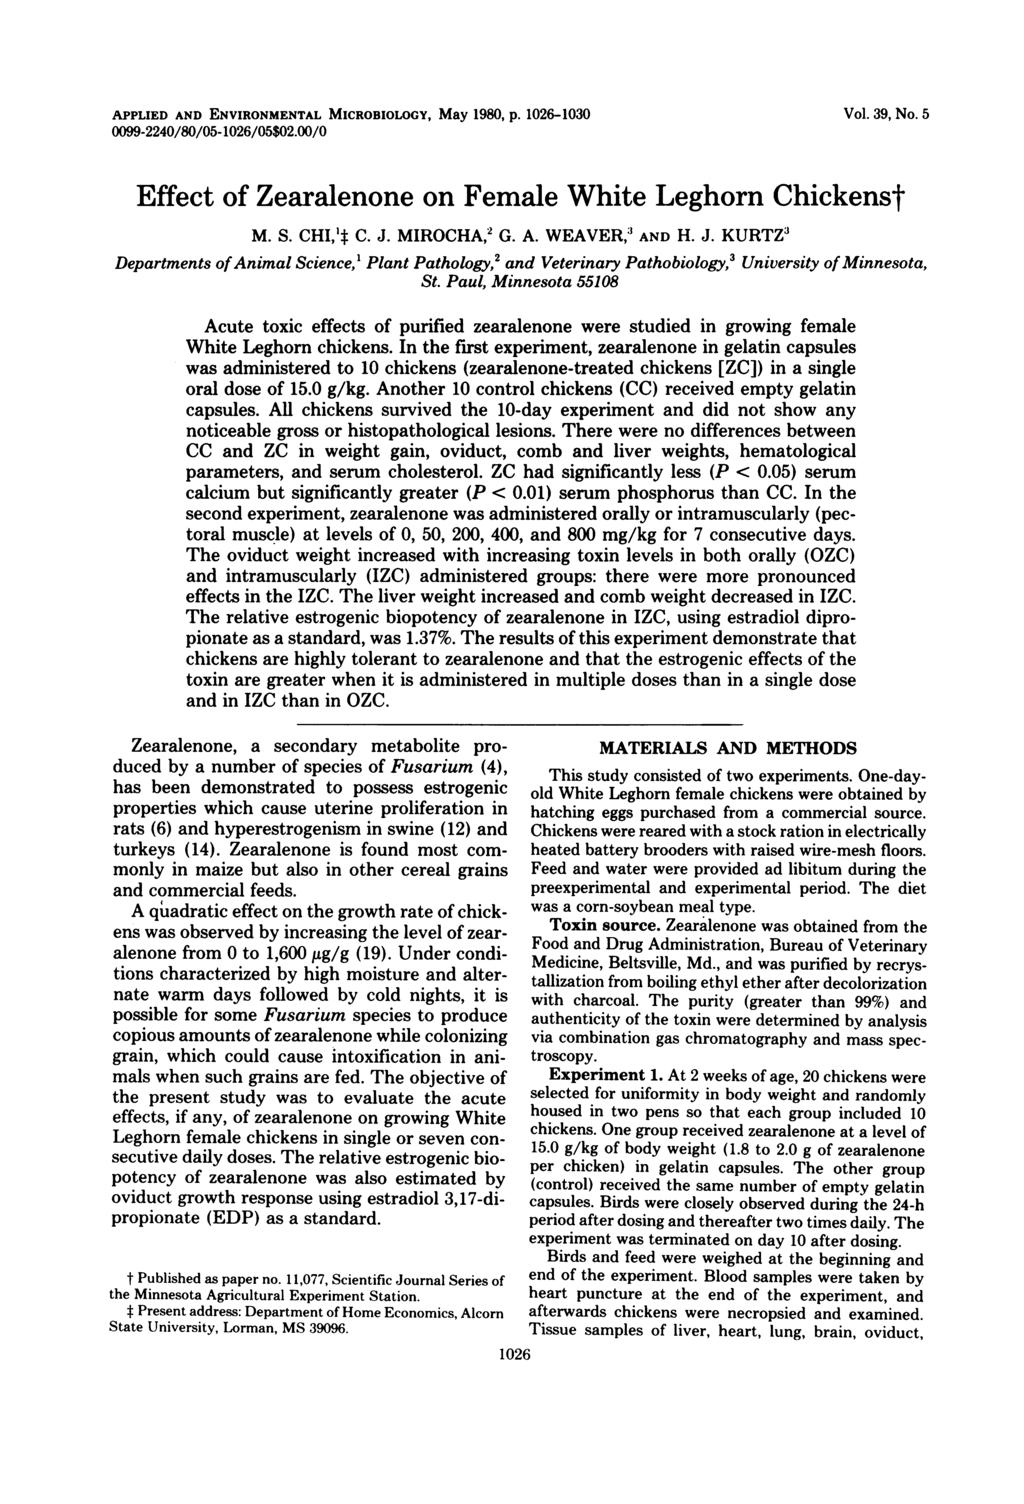 APPLIED AND ENVIRONMENTAL MICROBIOLOGY, May 1980, p. 1026-1030 0099-2240/80/05-1026/05$02.00/0 Vol. 39, No. 5 Effect of Zearalenone on Female White Leghorn Chickenst M. S. CHI,': C. J. MIROCHA,2 G. A. WEAVER,' AND H.